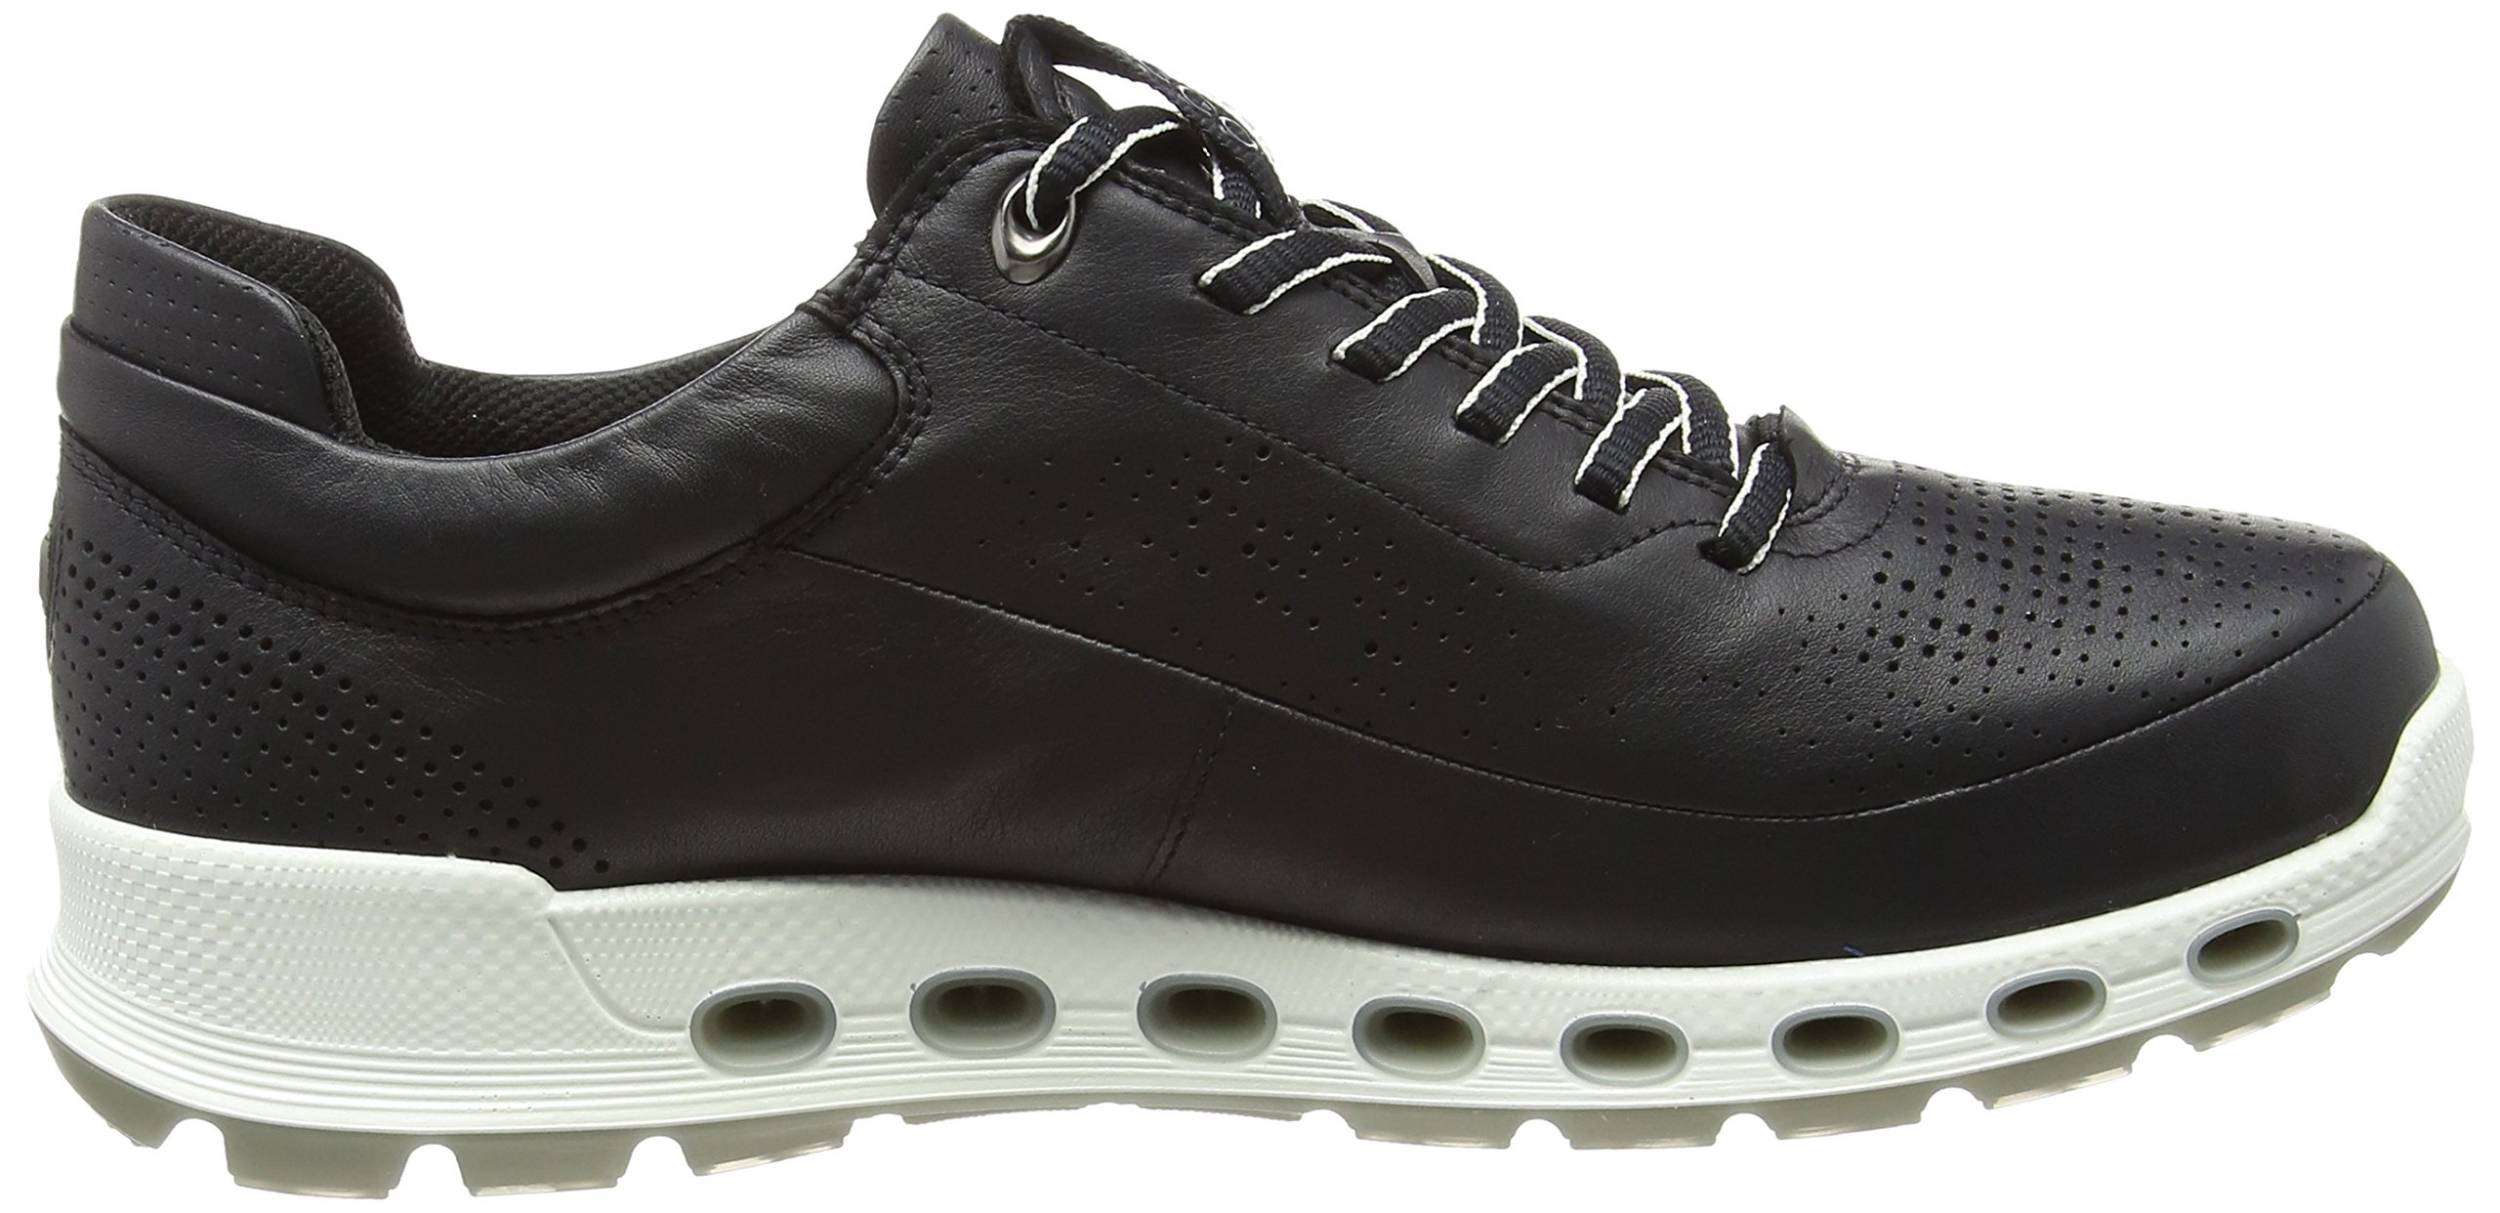 12 Reasons to/NOT to Buy Ecco Cool 2.0 Leather GTX (Feb 2022) | RunRepeat